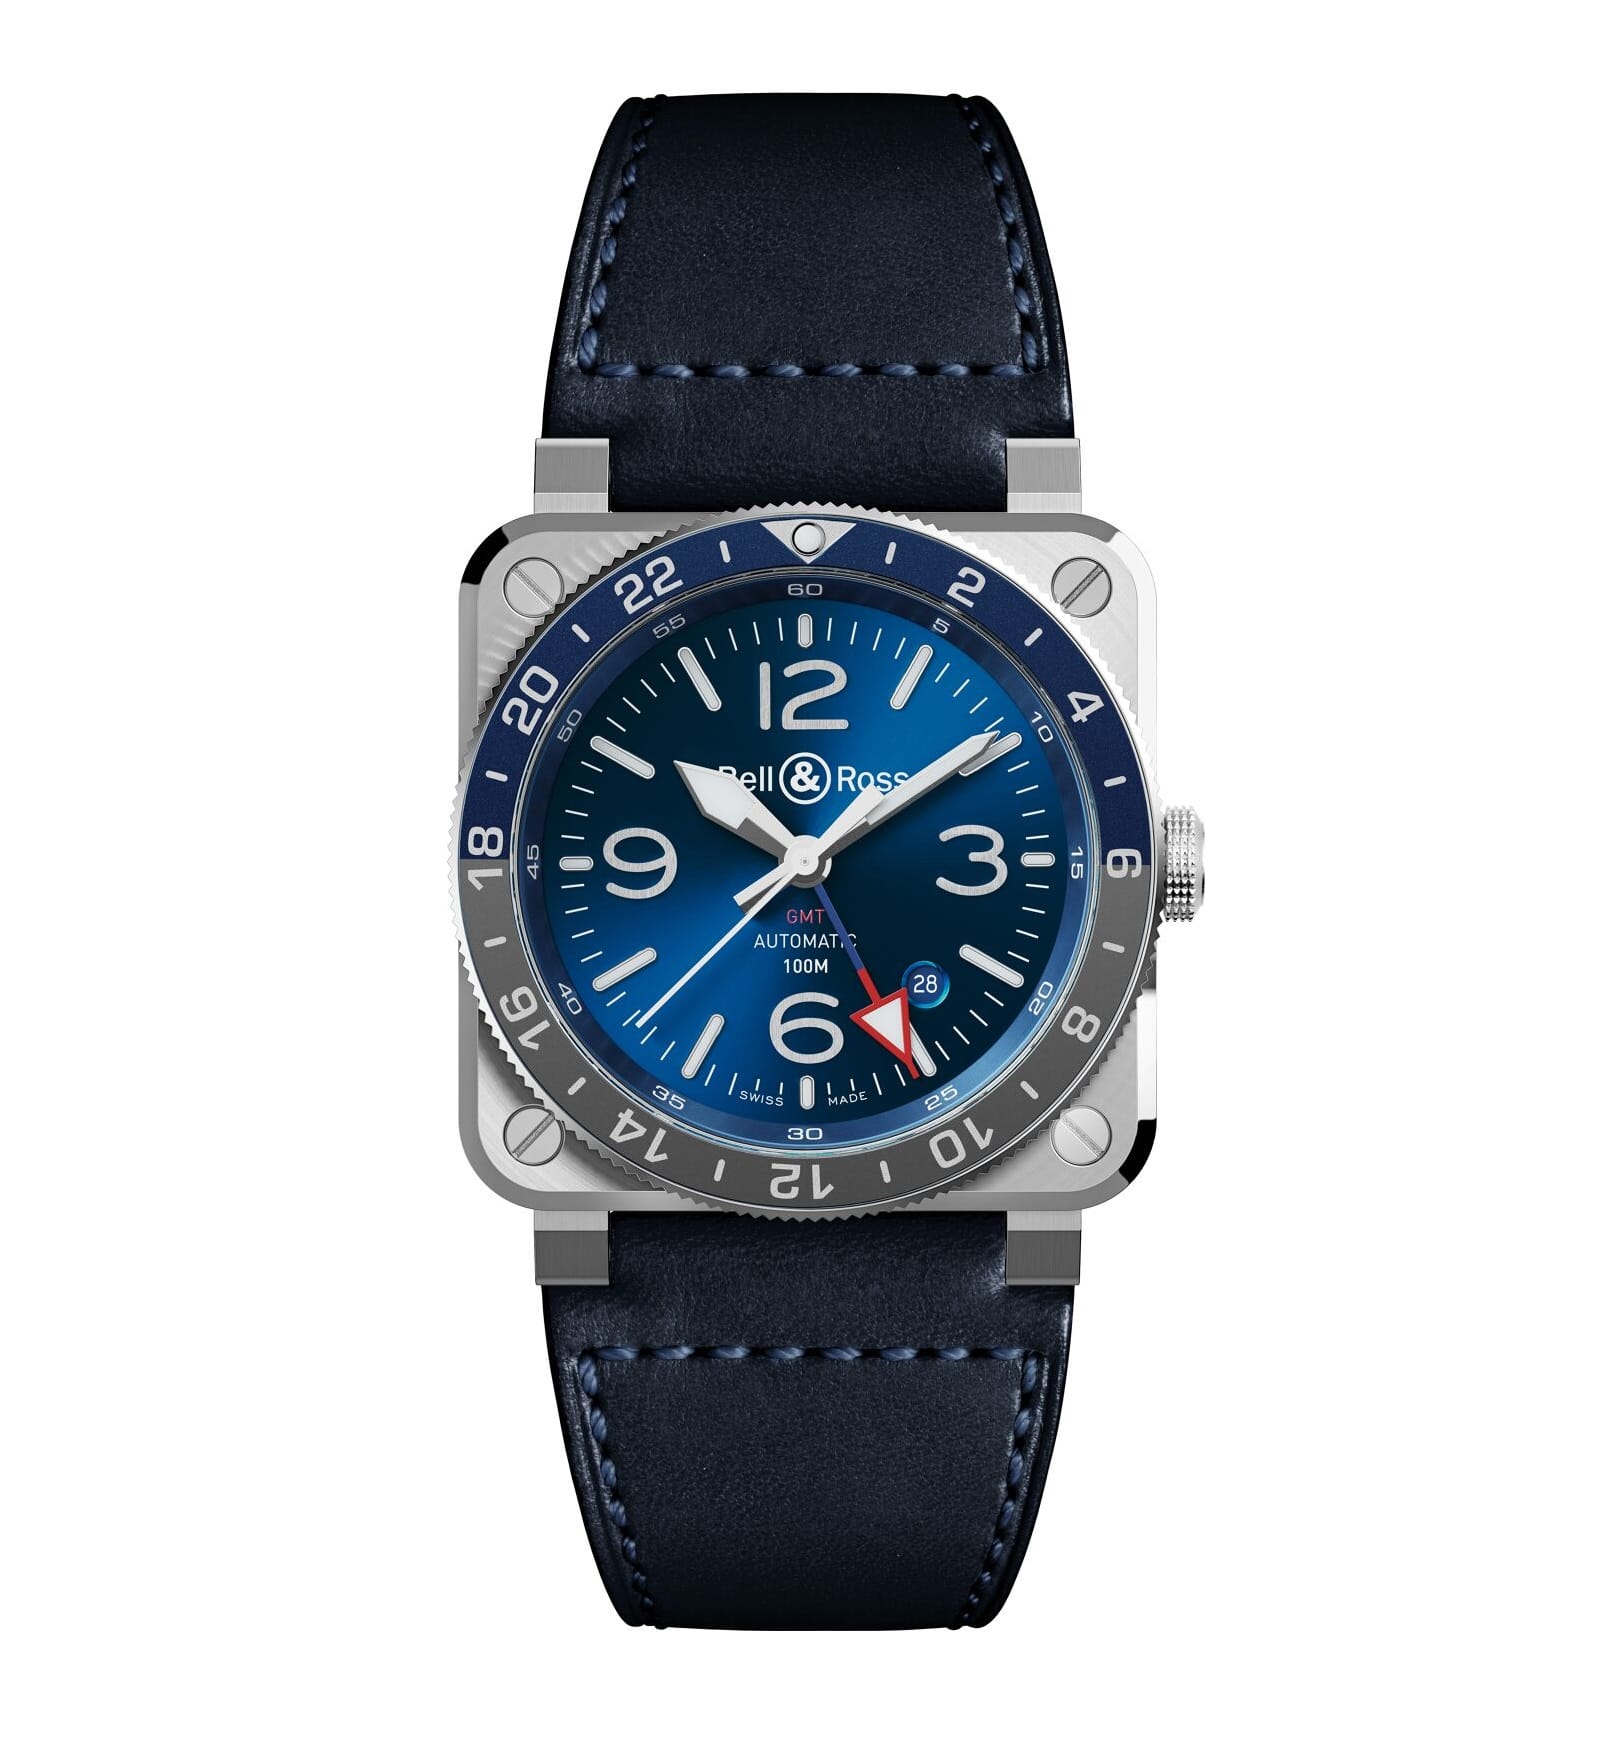 Watches & Wonders 2023 - Bell & Ross BR 03-93 GMT Blue